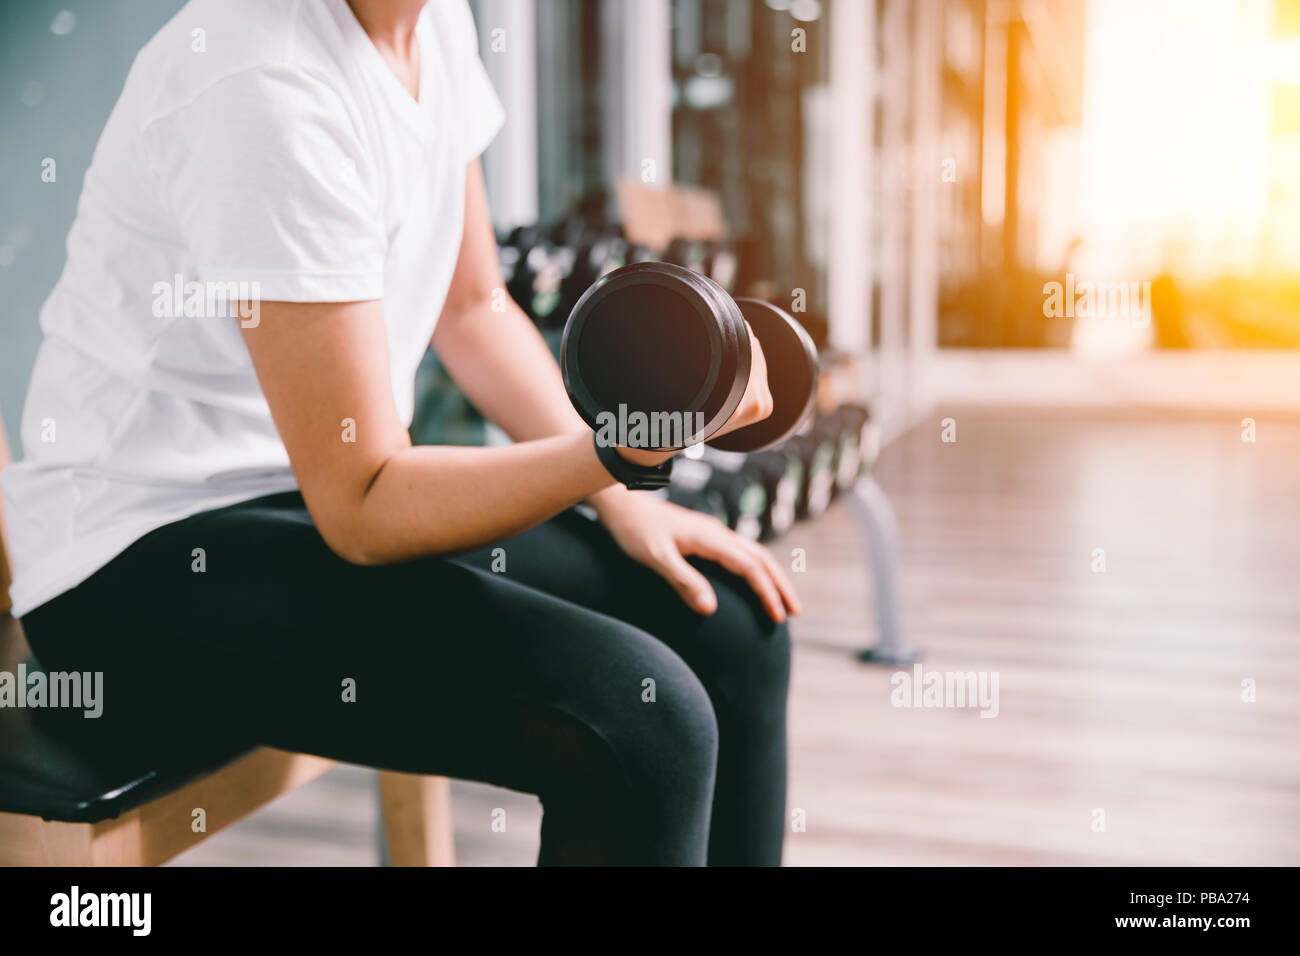 closeup slim healthy woman lifting dumbbell personal weight training in sport club casual wear Stock Photo